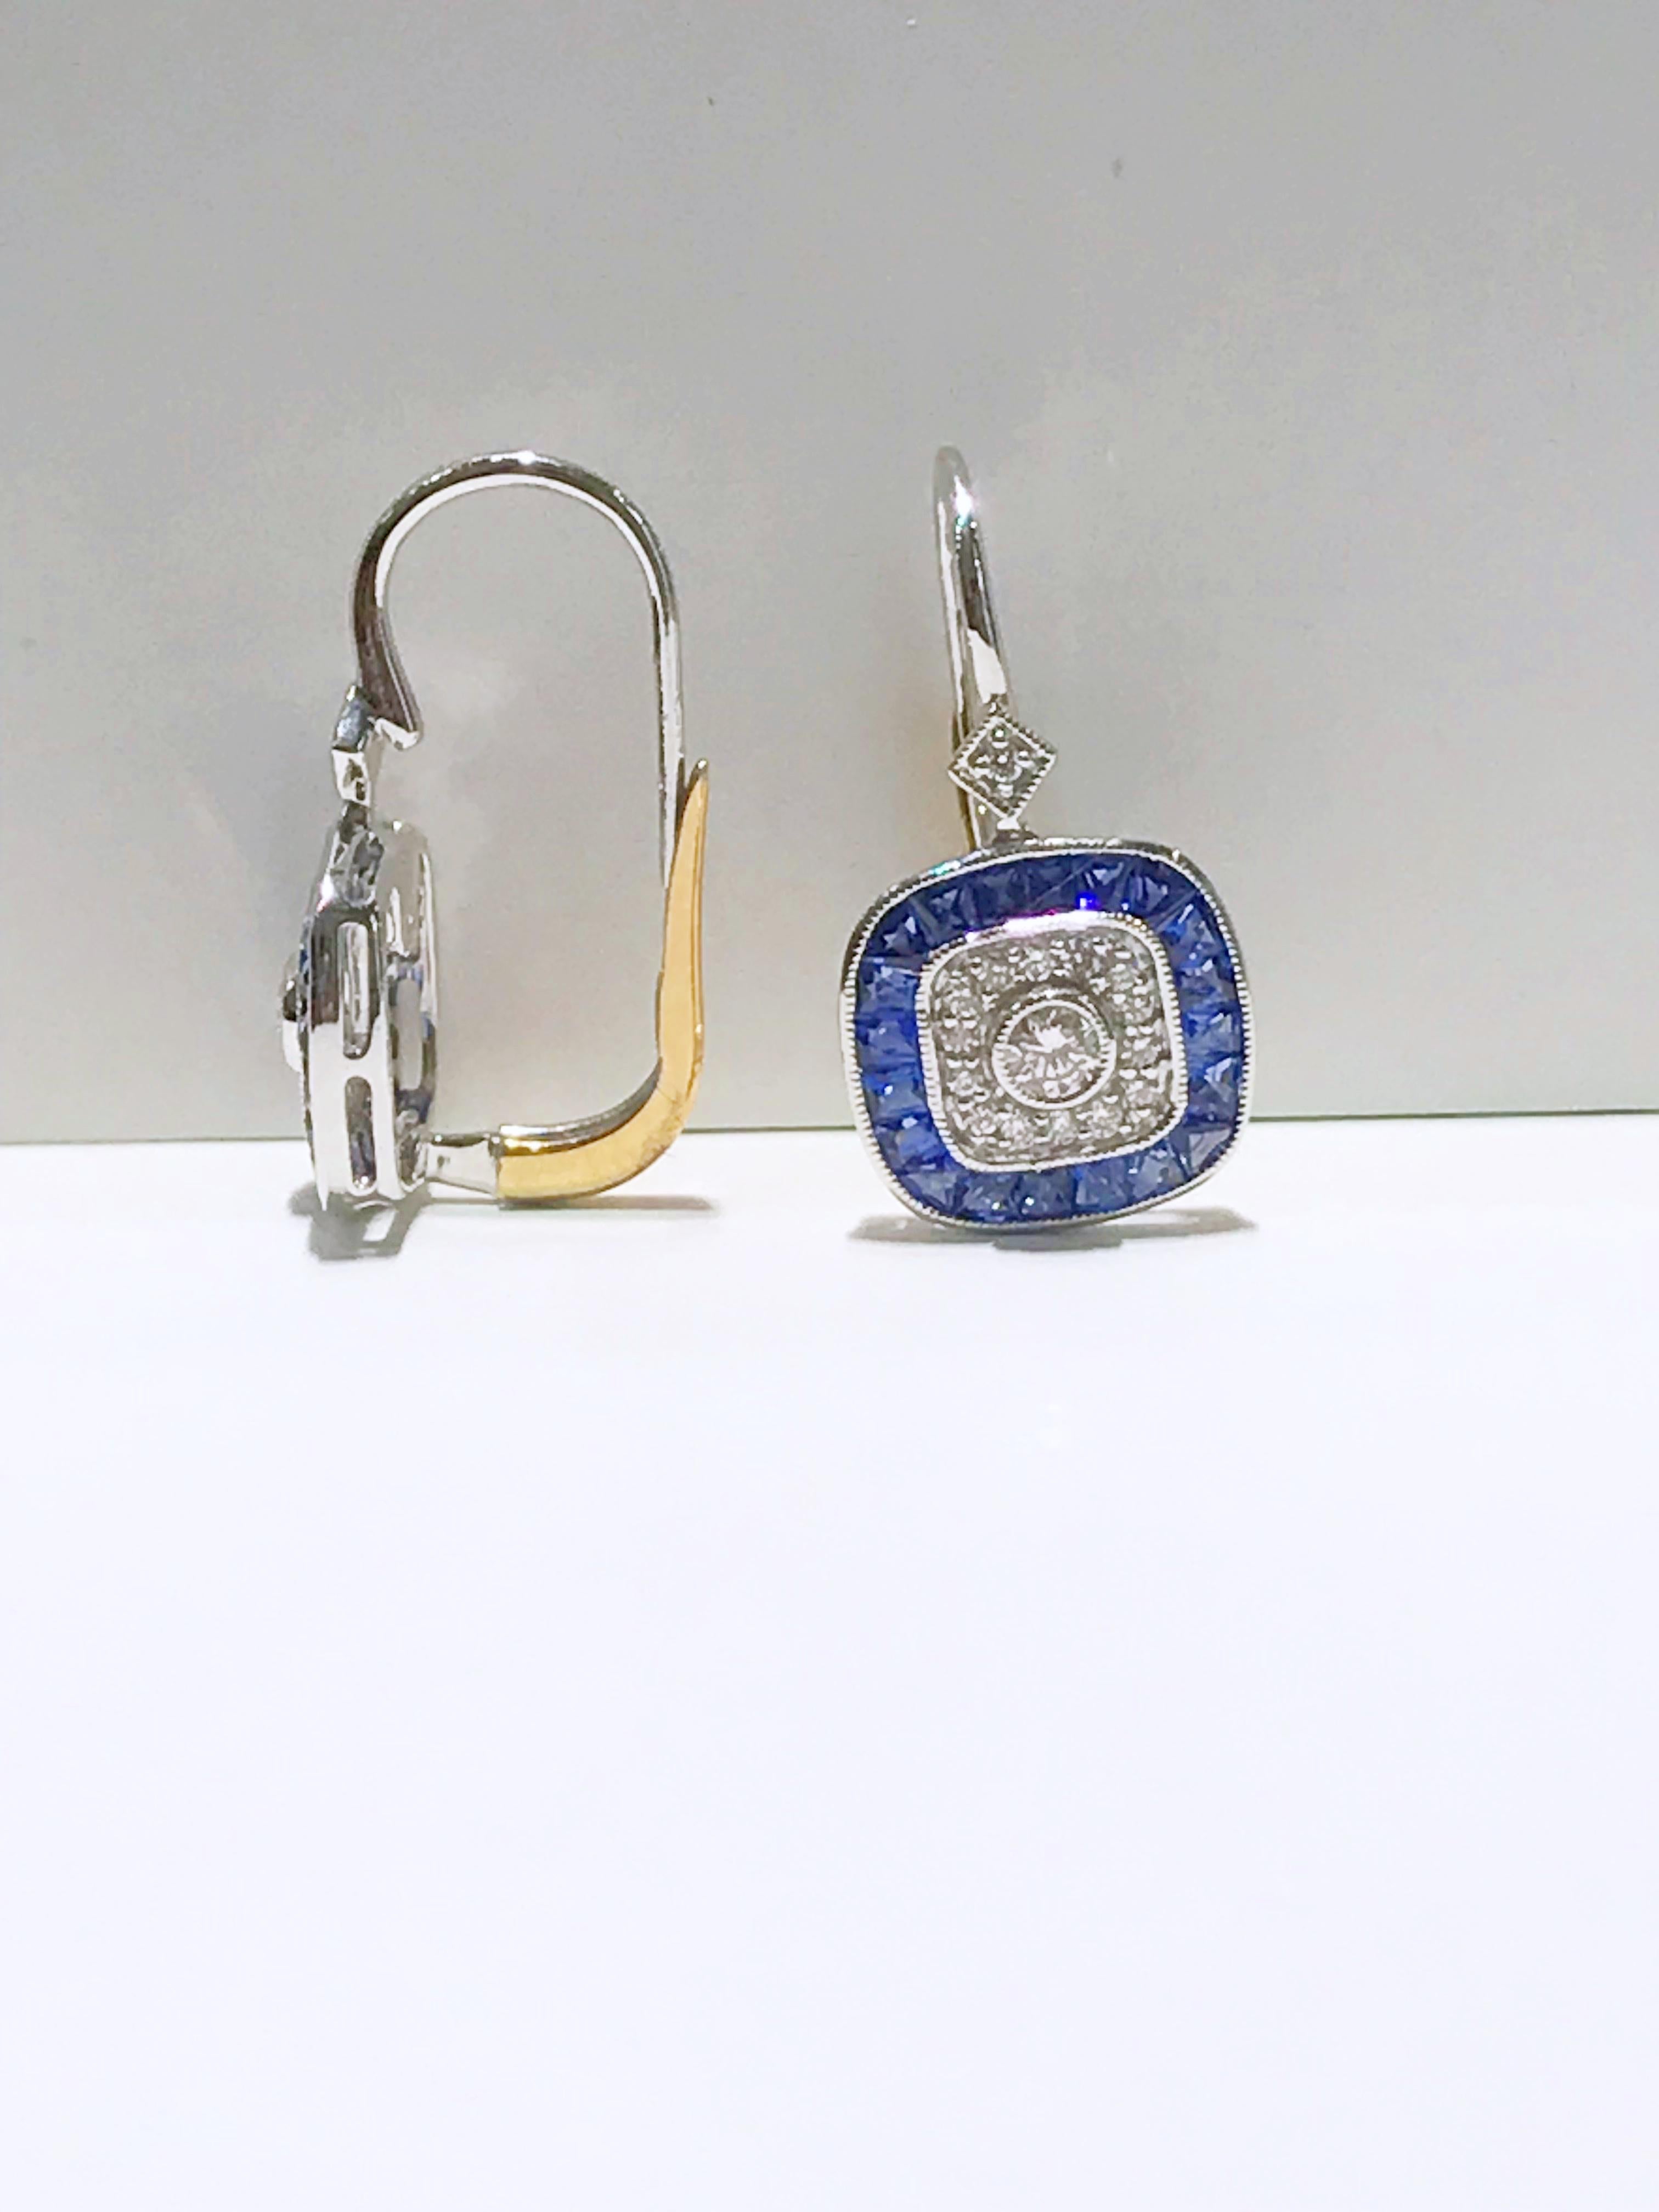 Art Deco Style and Diamond and Sapphire Earrings in 14 Karat White Gold (Art déco)